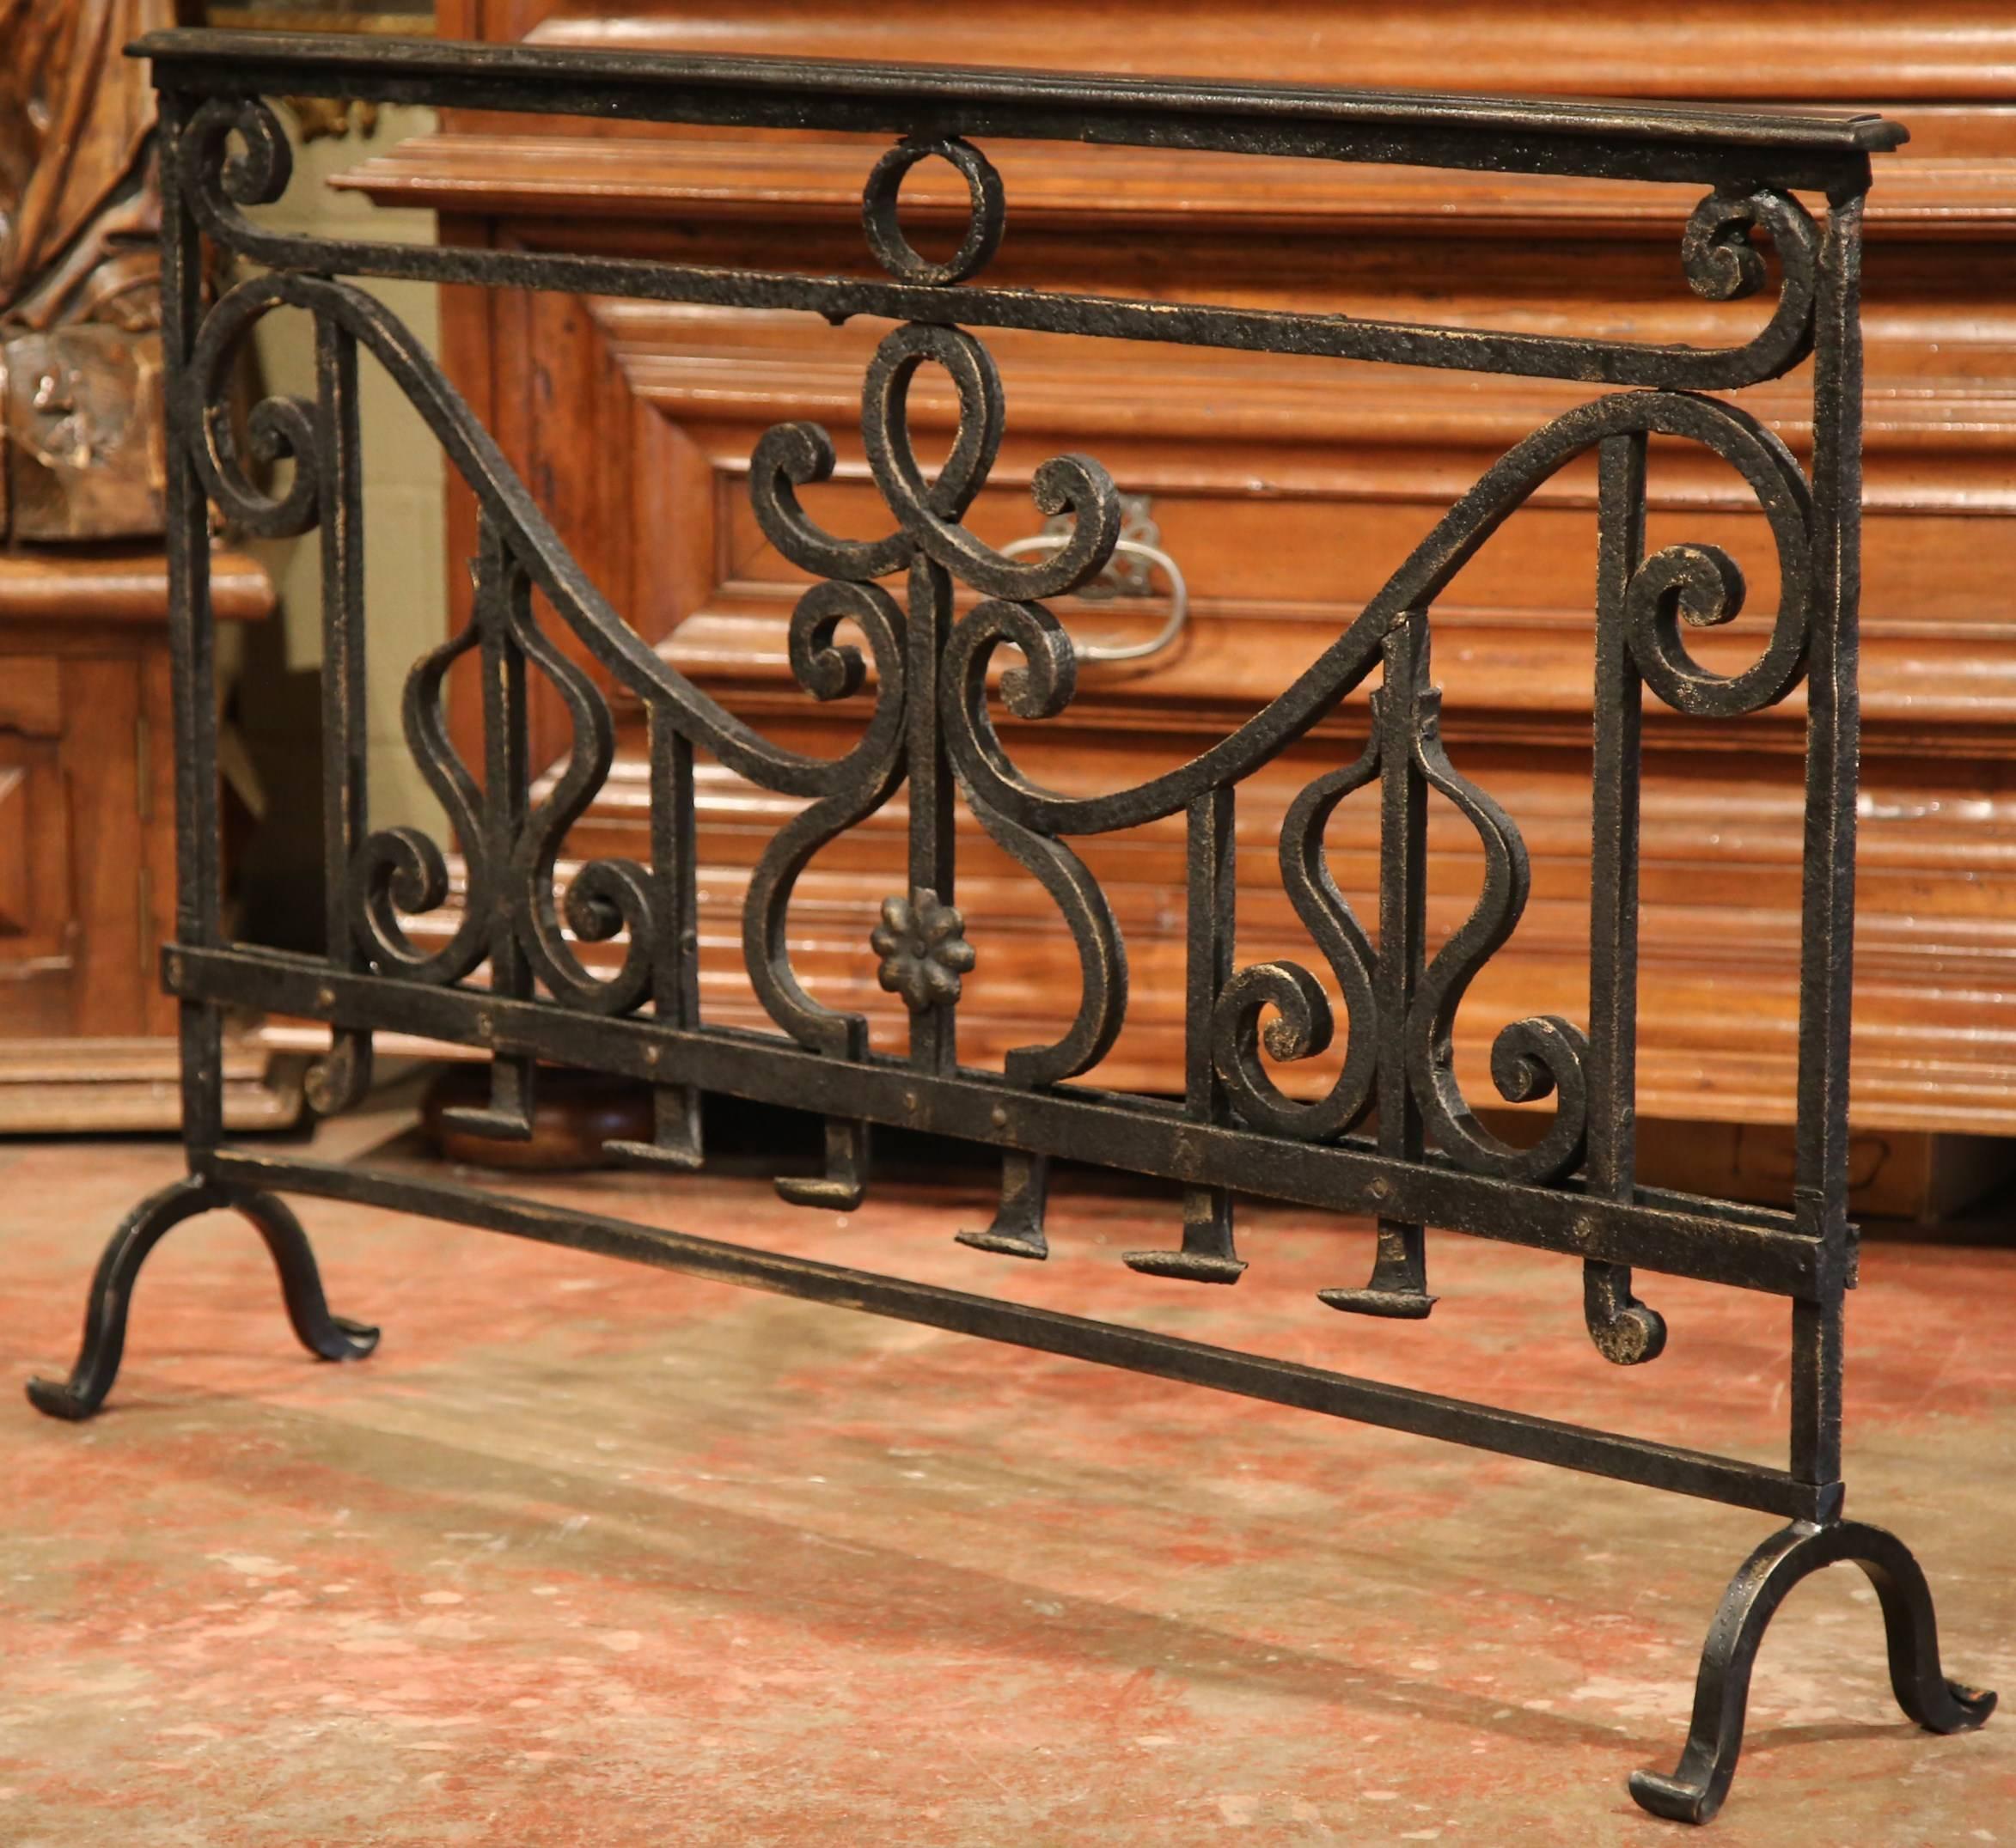 Embellish your fireplace in the living room, dining room or bedroom with this heavy, antique fireplace screen. Forged in France, circa 1780, the Classic wrought iron screen stands on curved feet at each end and has its original painted patina. The